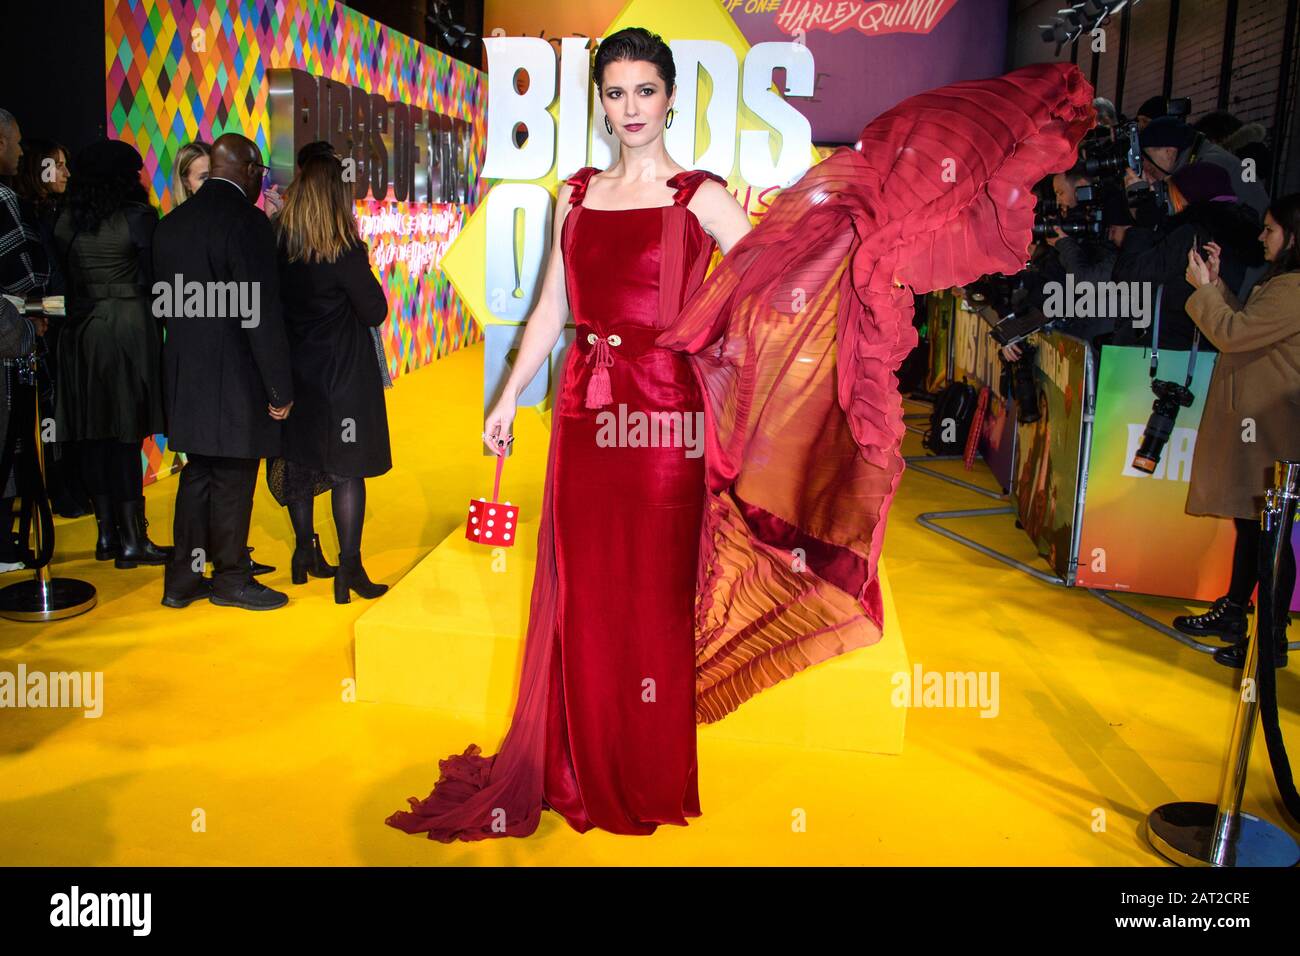 Mary Elizabeth Winstead attending the world premiere of Birds of Prey and the Fantabulous Emancipation of One Harley Quinn, held at the BFI IMAX, London. Stock Photo